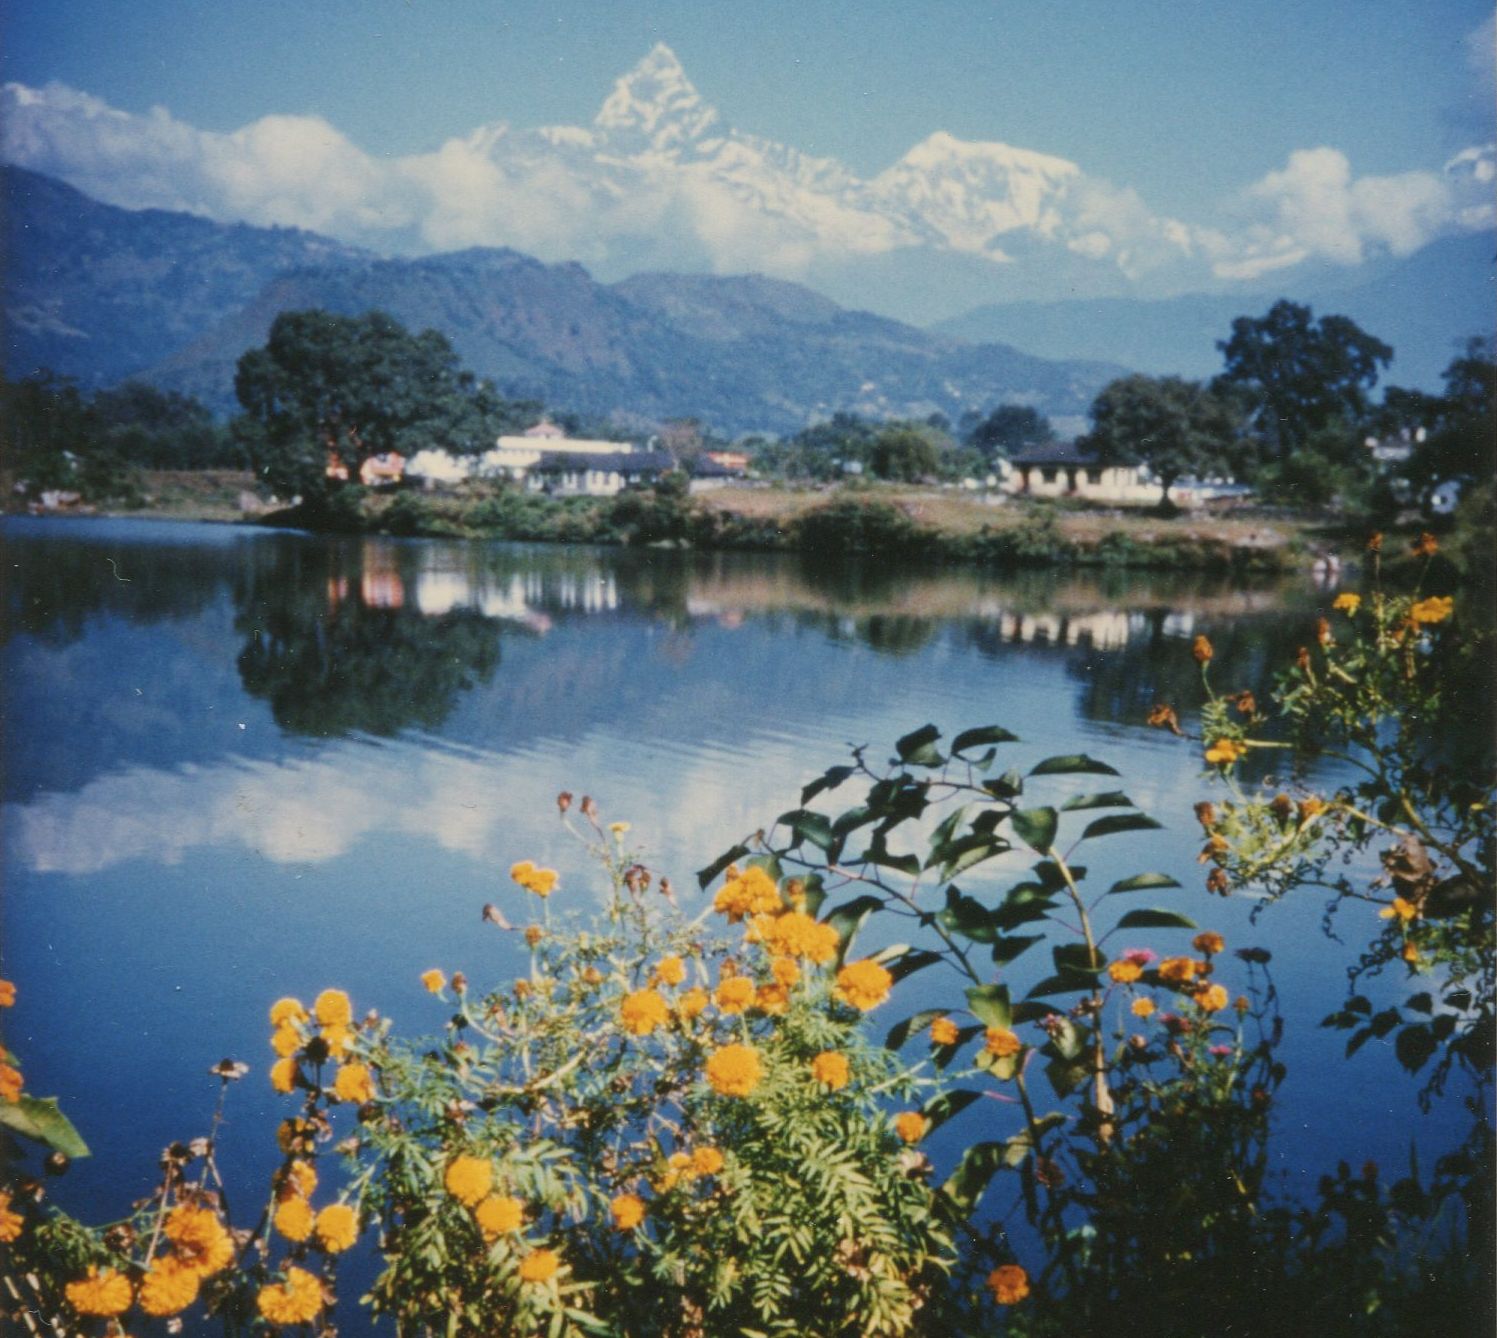 Mount Macchapucchre ( The Fishtail Mountain ) from Phewa Tal at Pokhara in Nepal